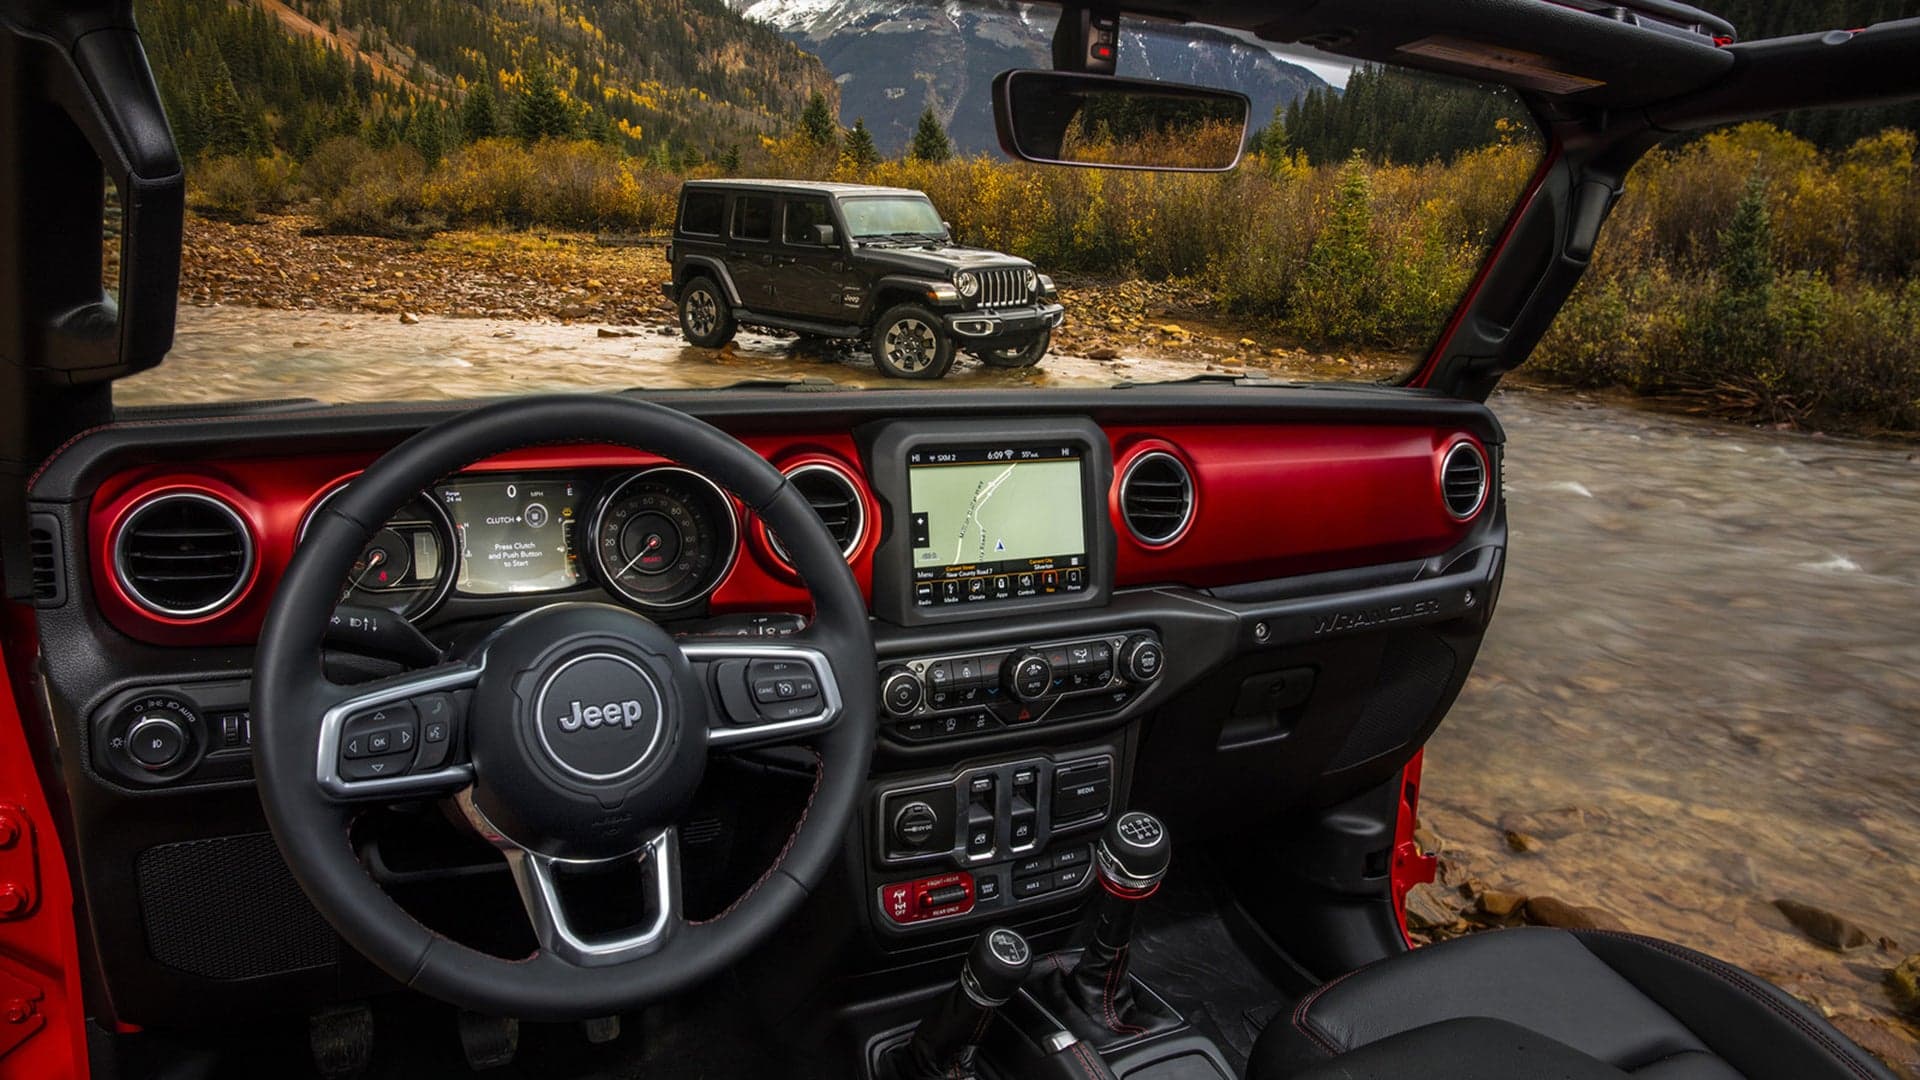 Here’s What the All-New Interior Looks Like in the 2018 Jeep Wrangler